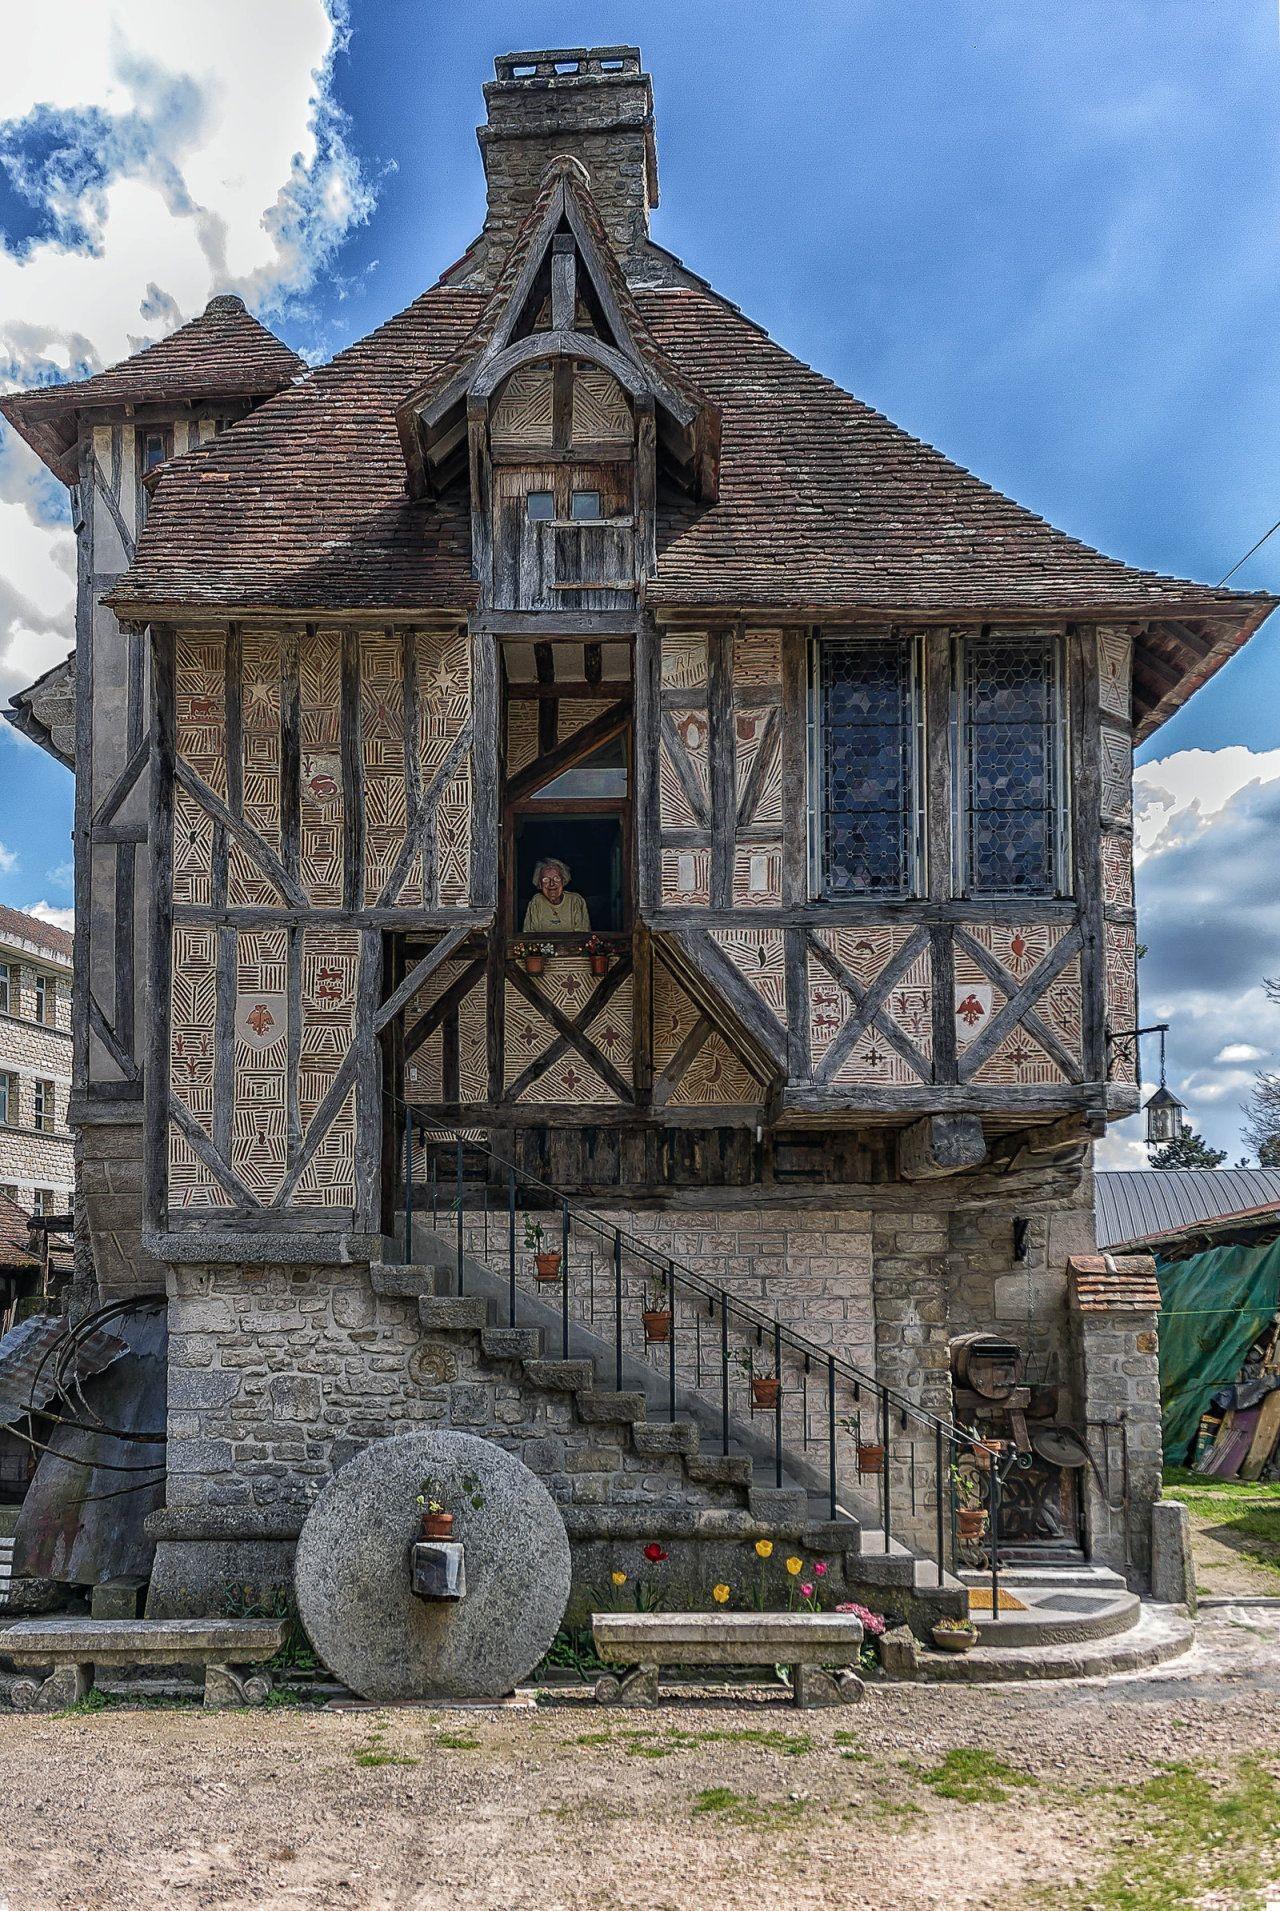 HD wallpaper, House, Portrait Display, France, Architecture, Old People, Old Building, Medieval, Building